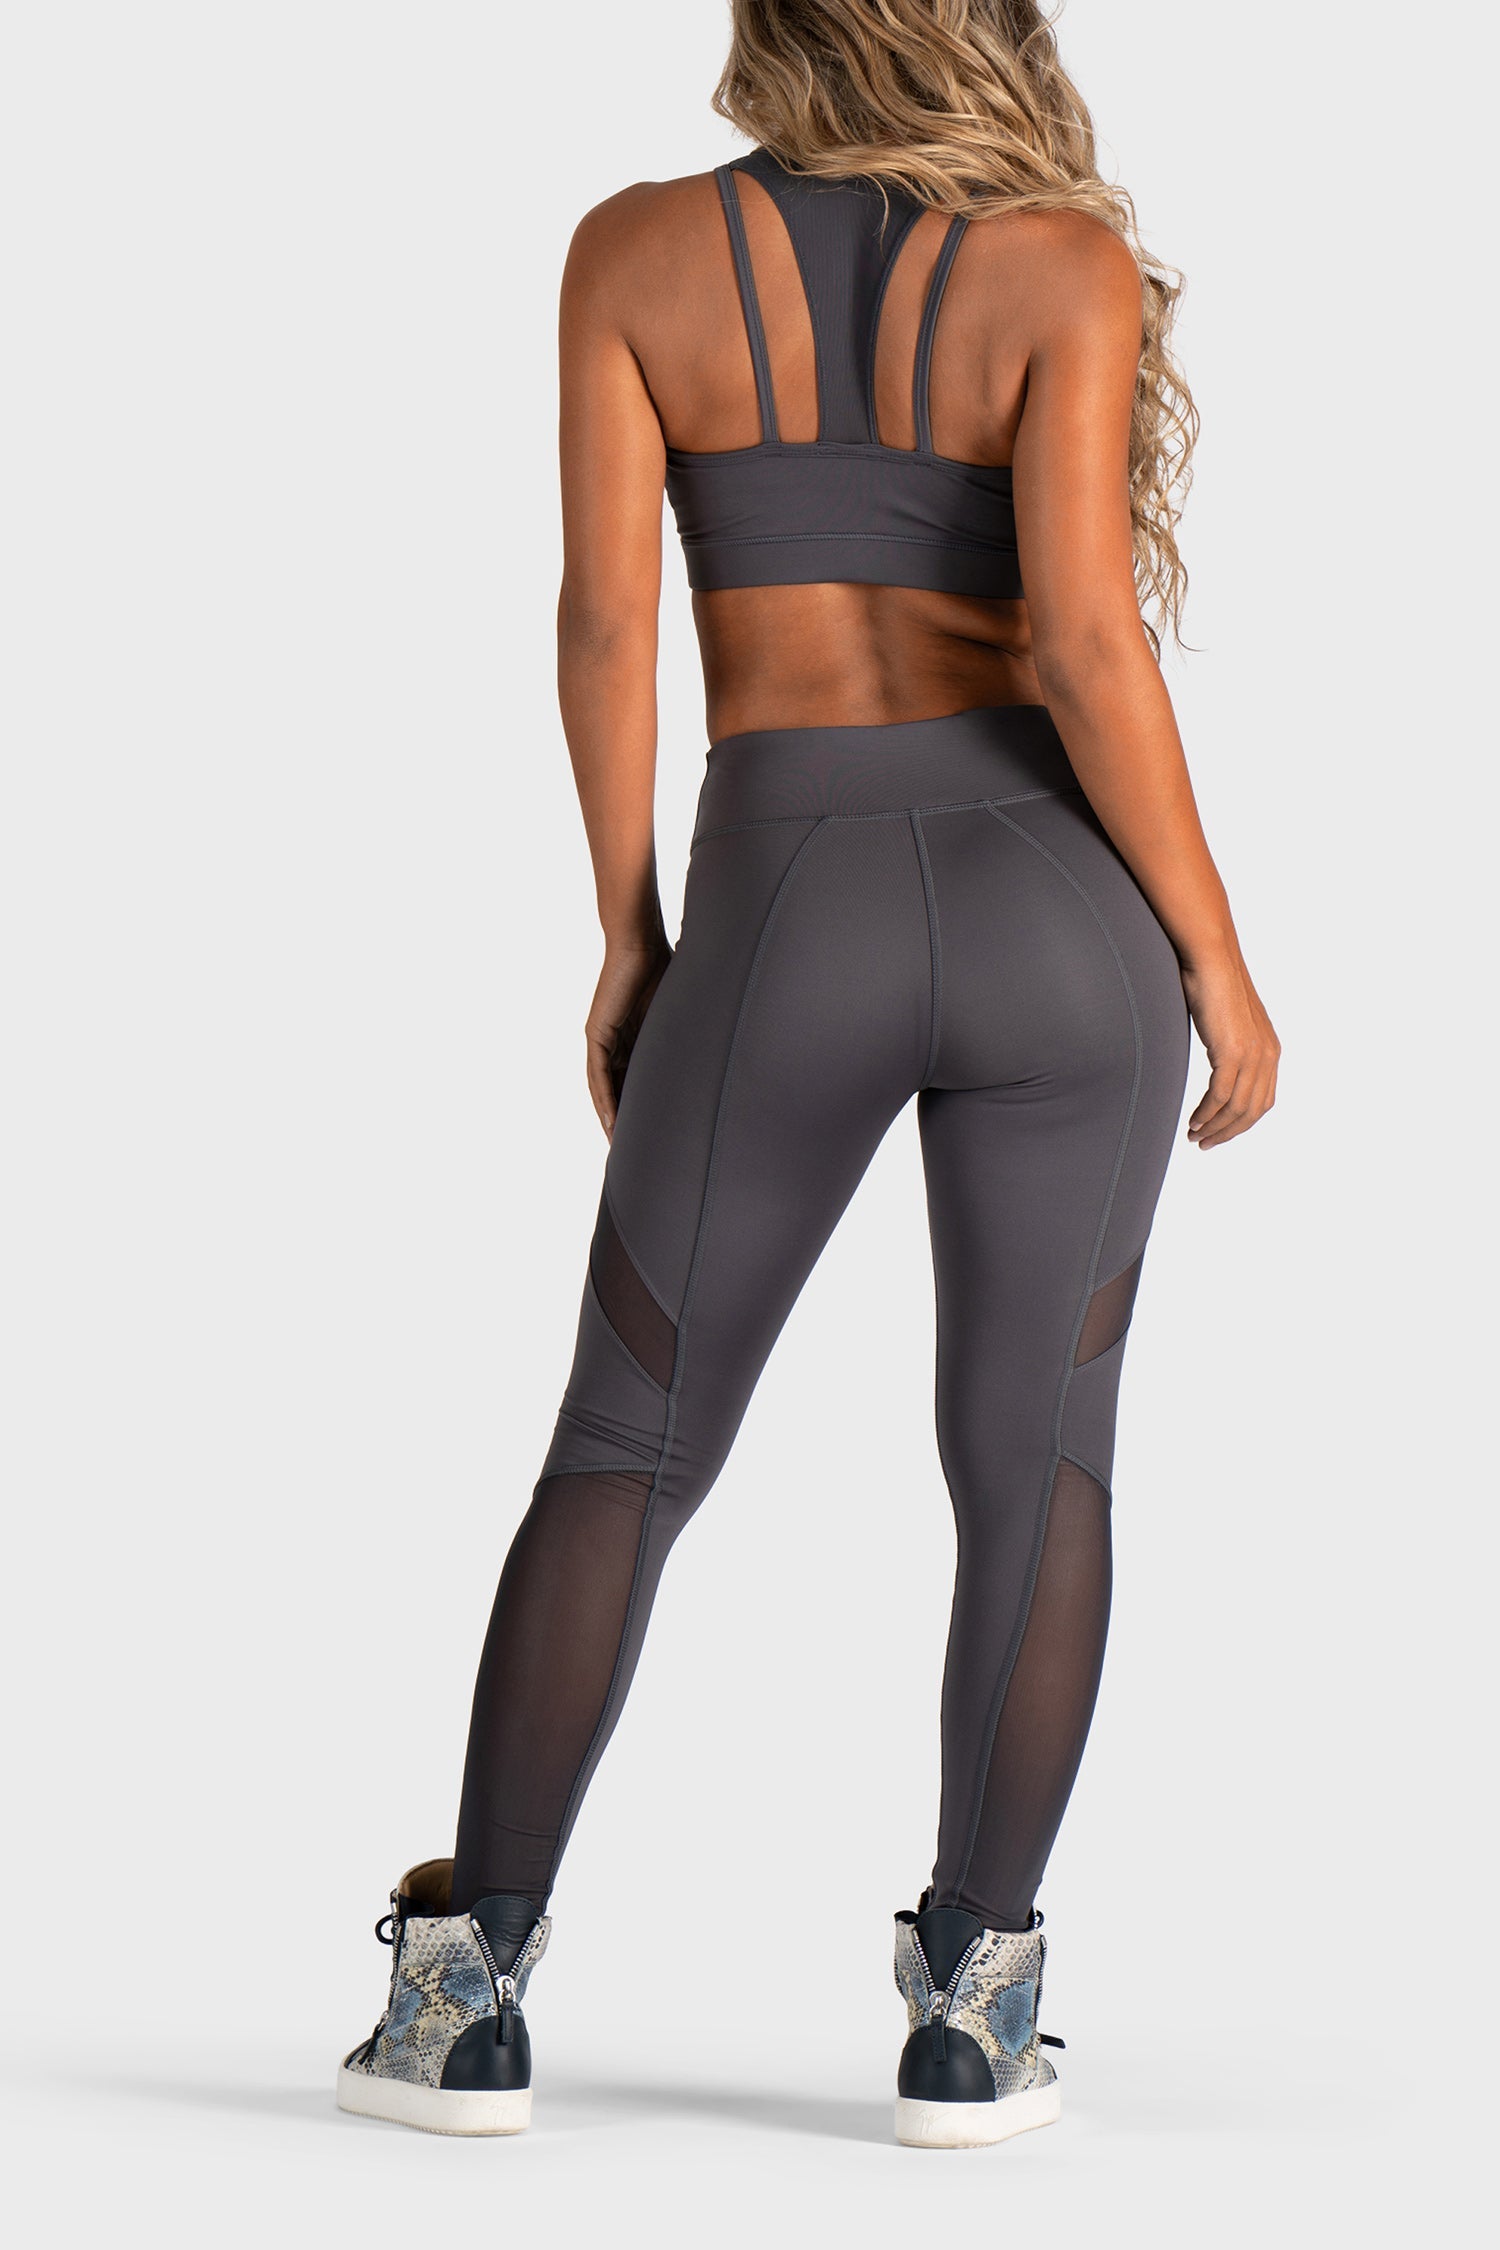 Tights, Clothes, & Outfits, Element